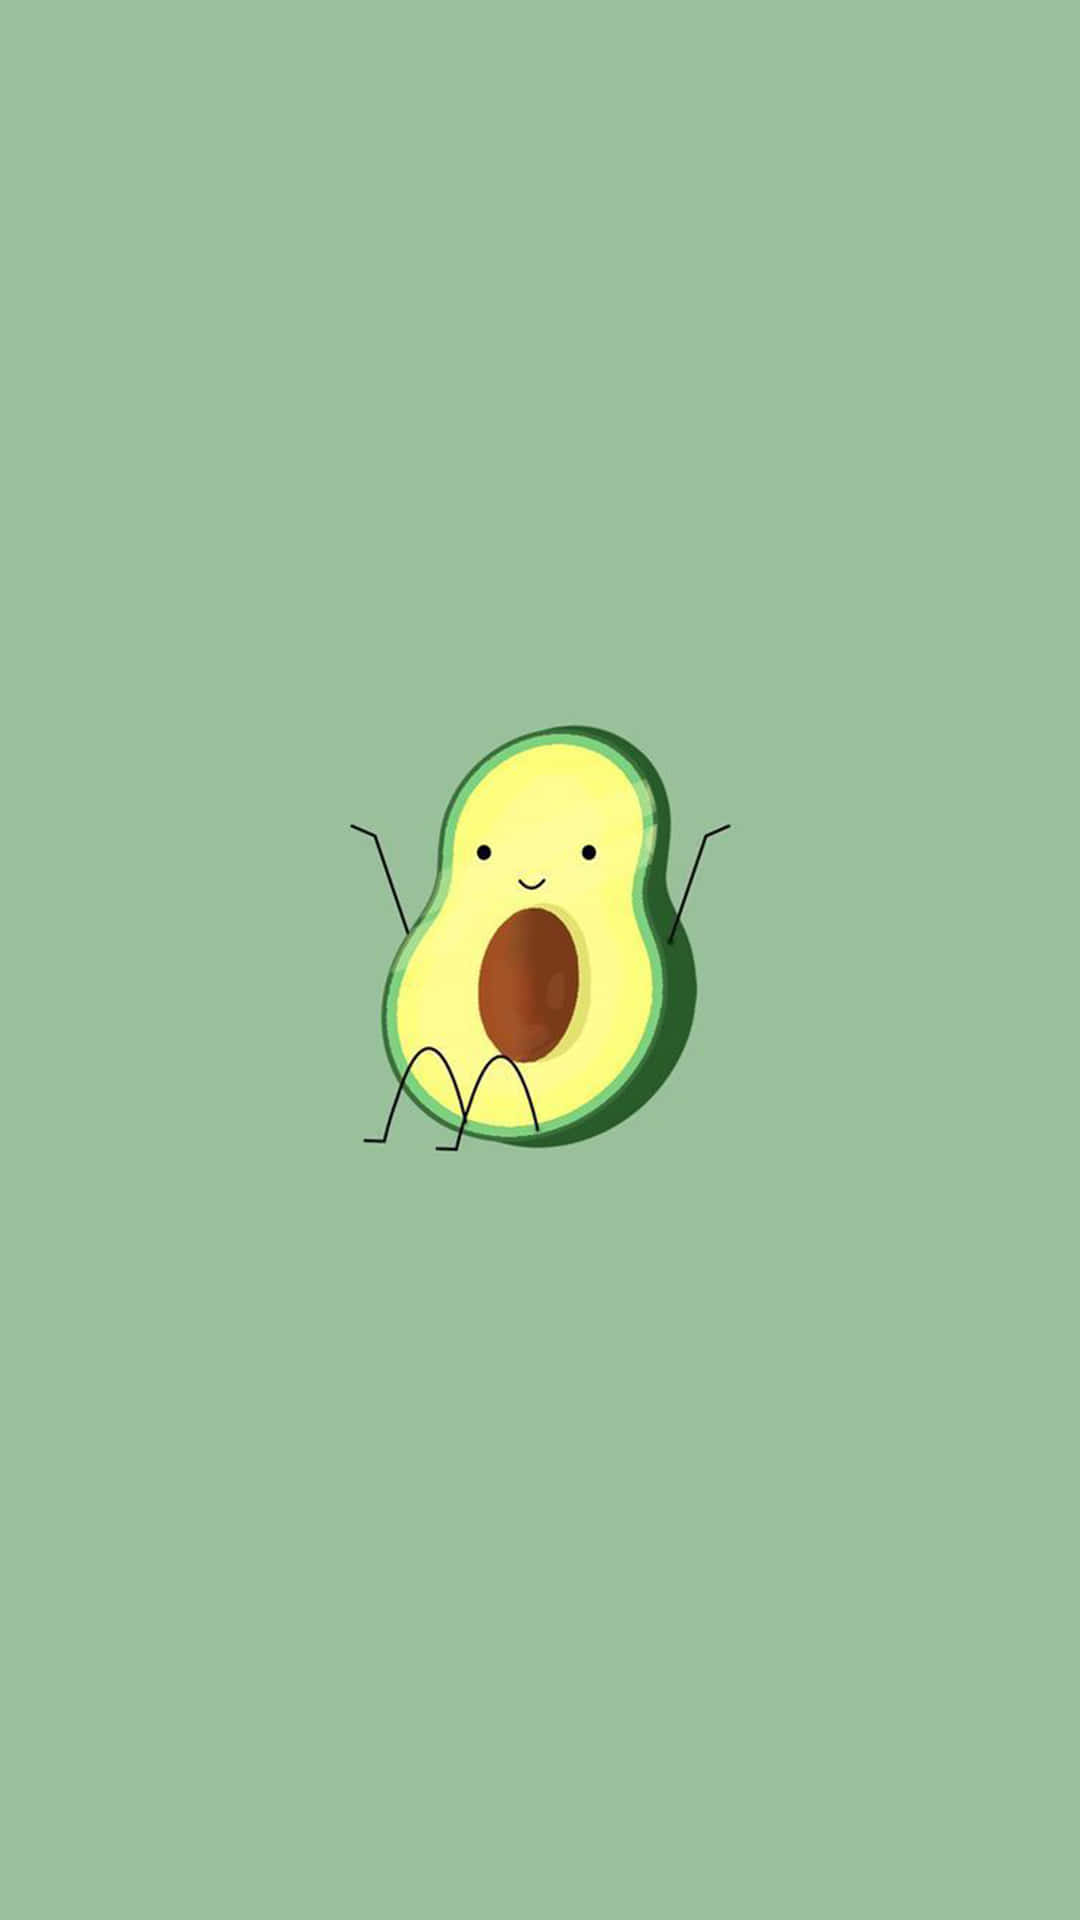 A Cute Avocado With Eyes Open On A Green Background Wallpaper